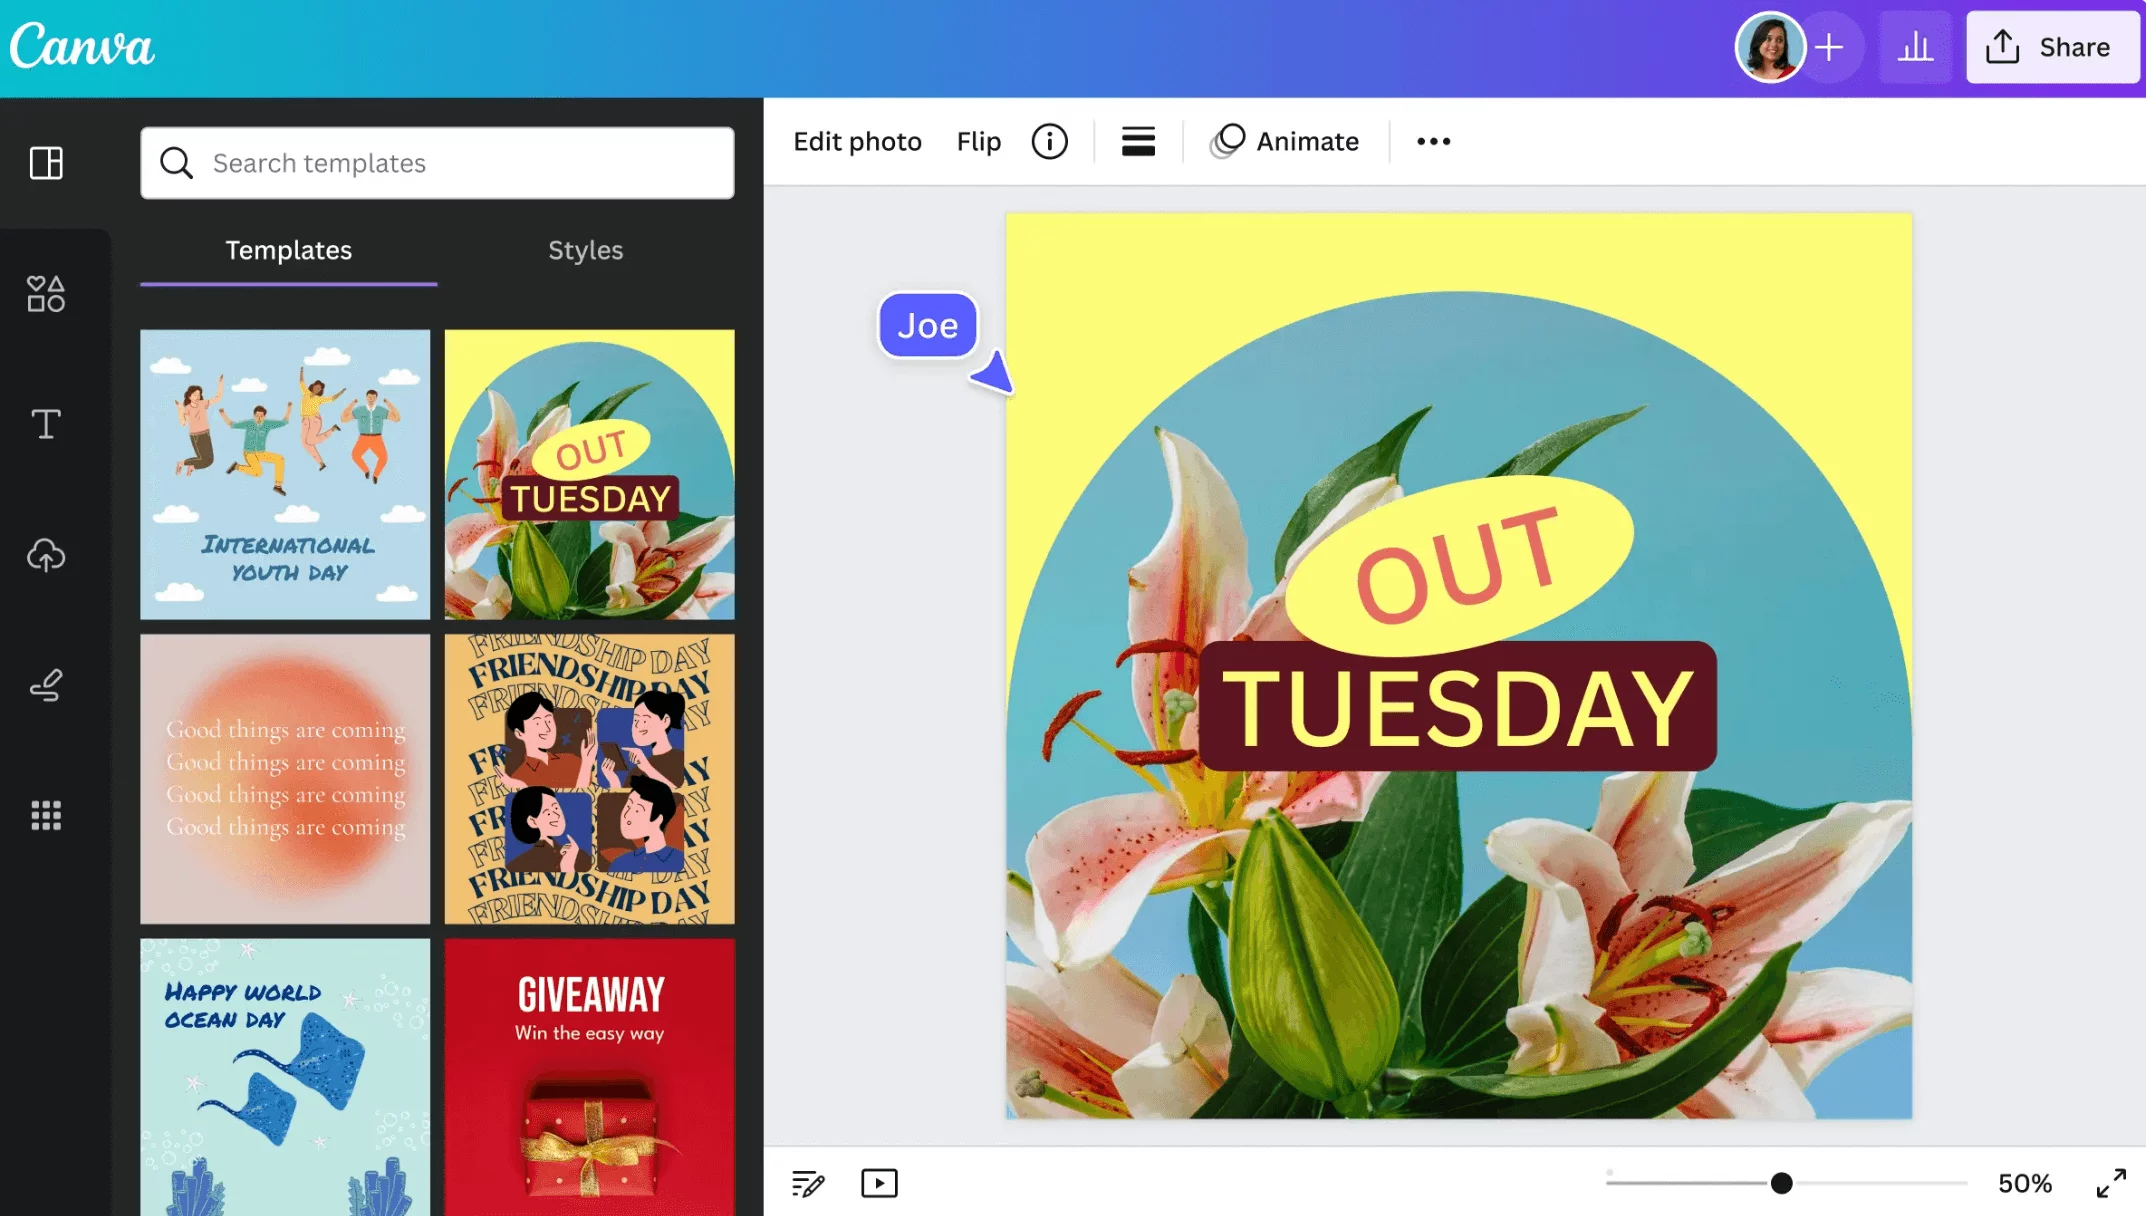 Canva interface displaying a variety of customizable design templates for social media posts.